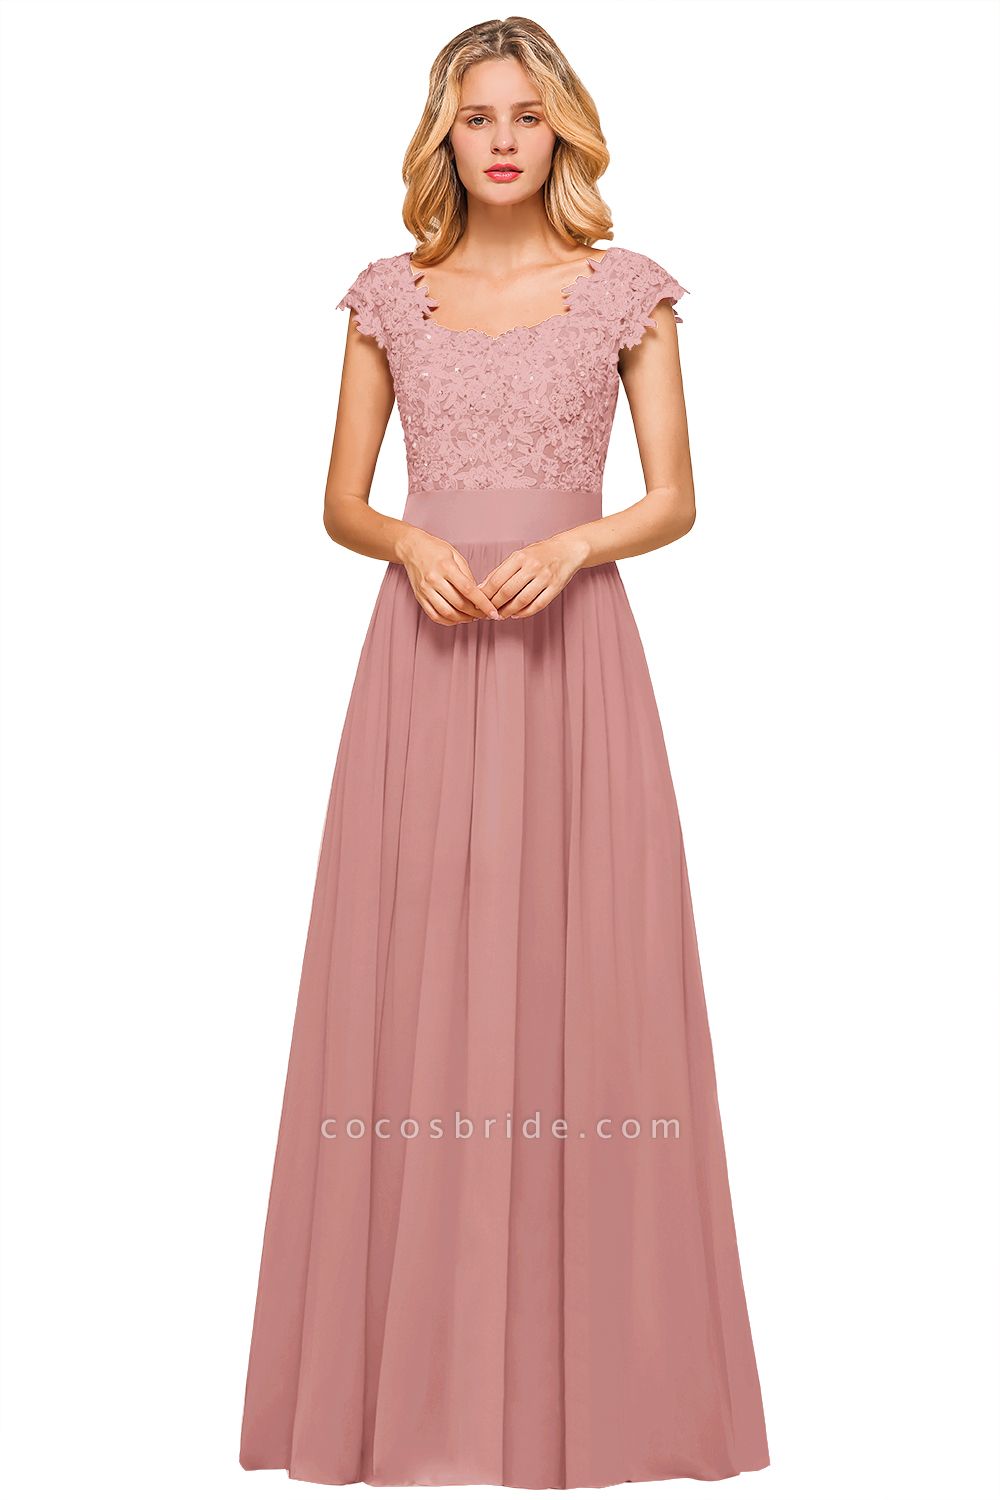 Burgundy Cap sleeves Lace Evening Gowns with Appliques